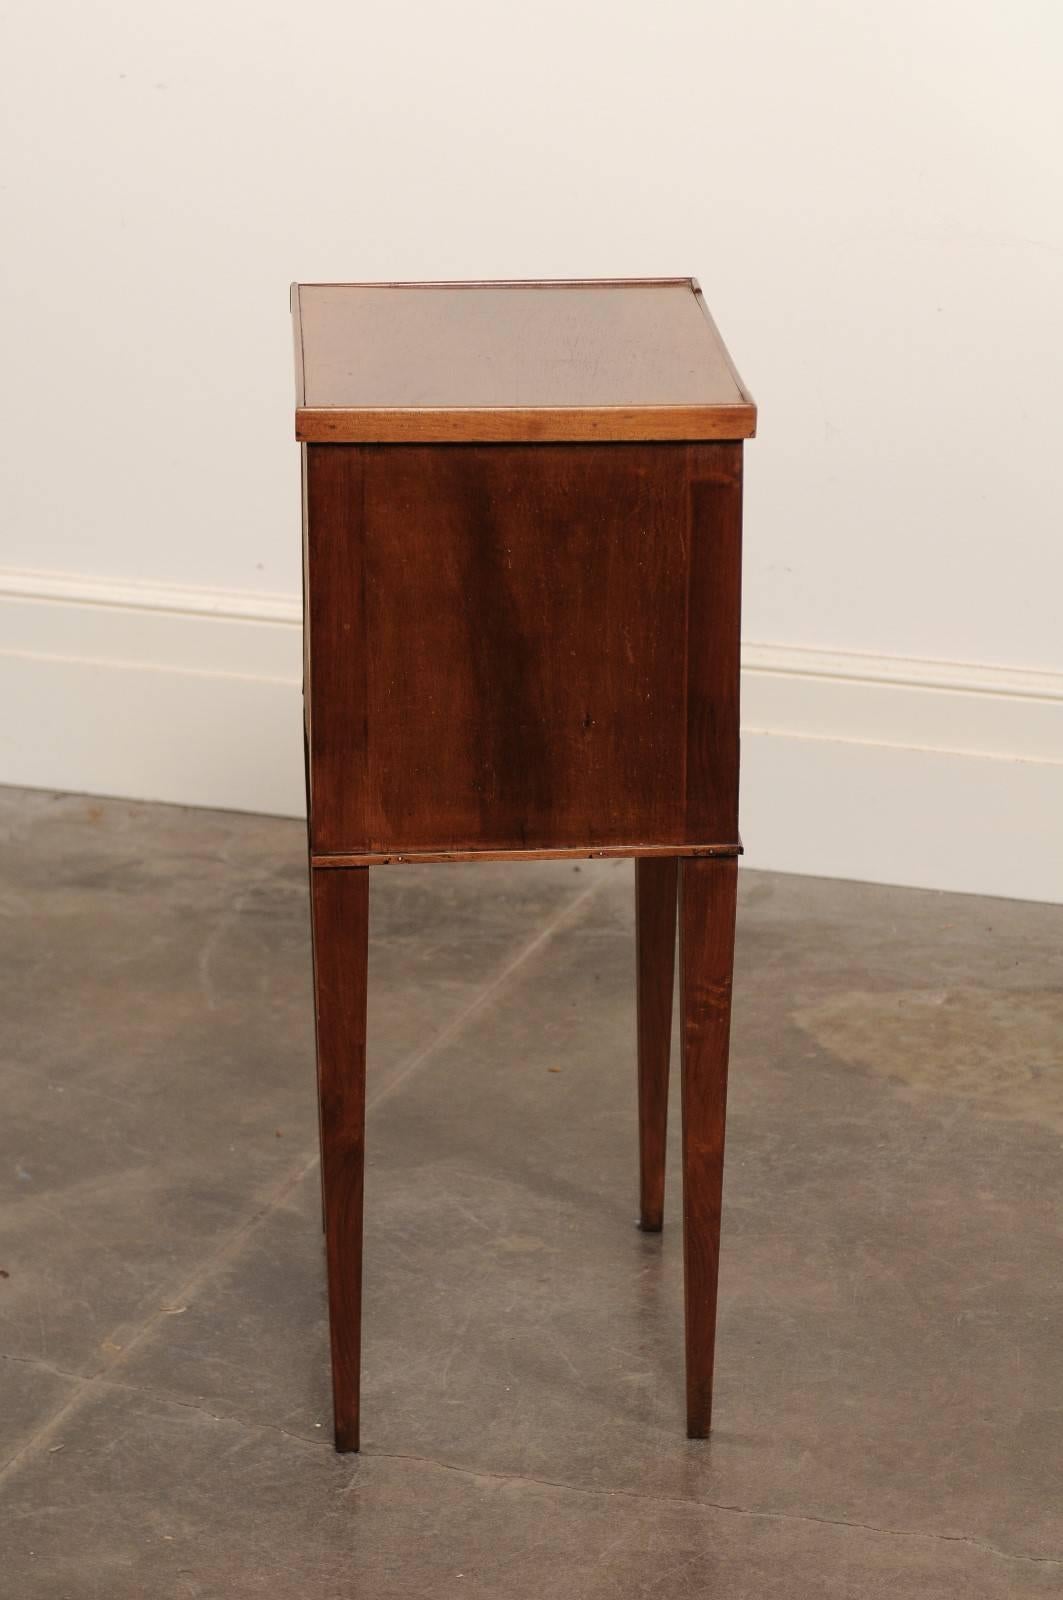 French Mahogany Turn of the Century Side Table with Two Drawers and Tapered Legs 1